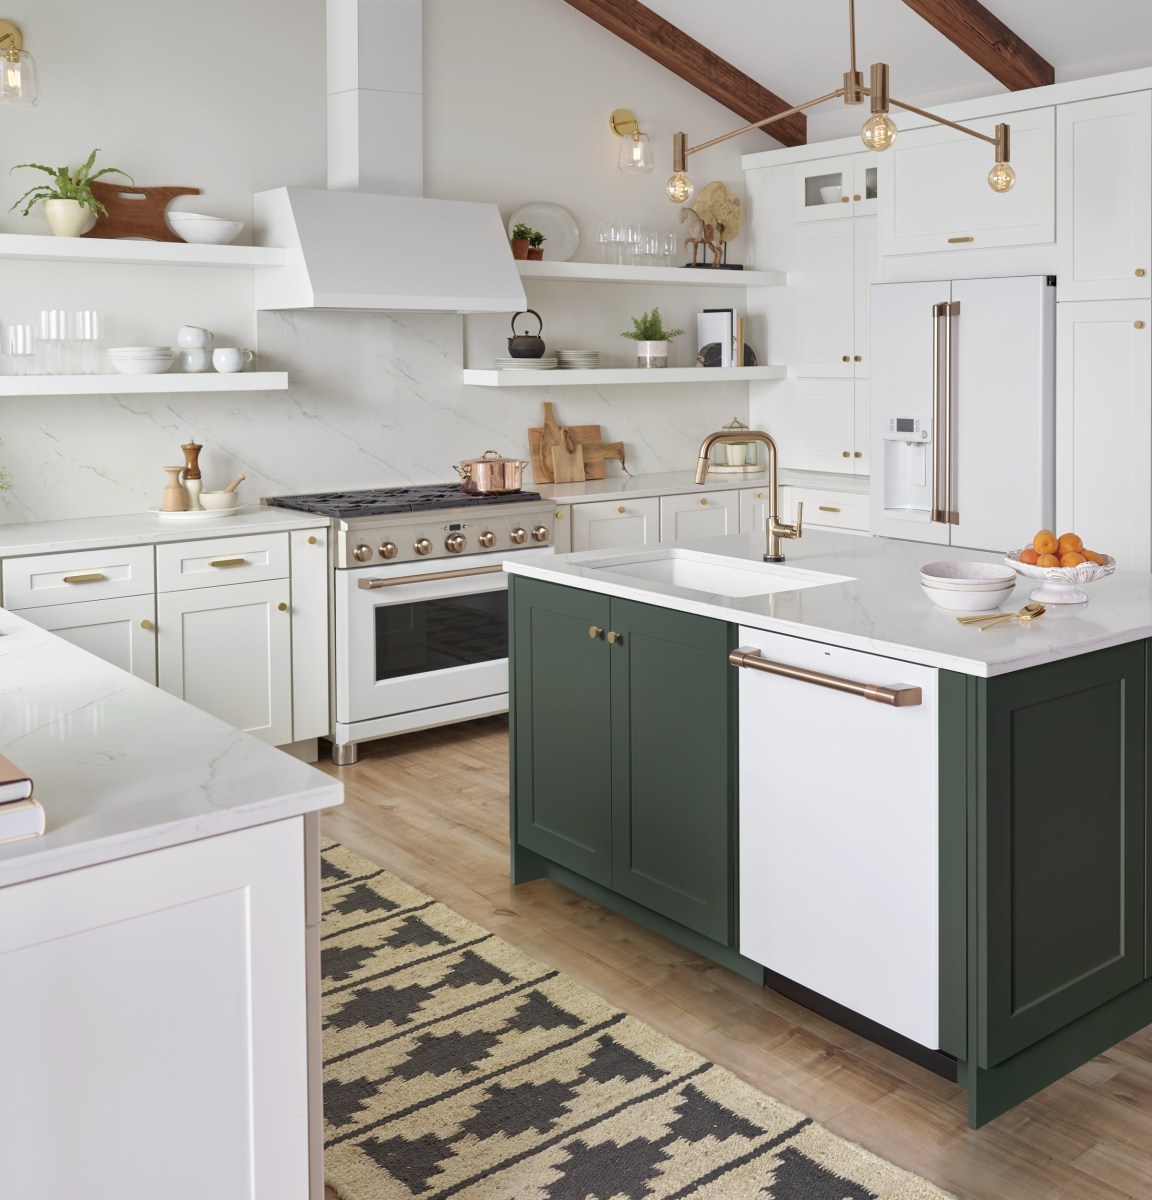 A matte white dishwasher and range match a white and forest green kitchen.